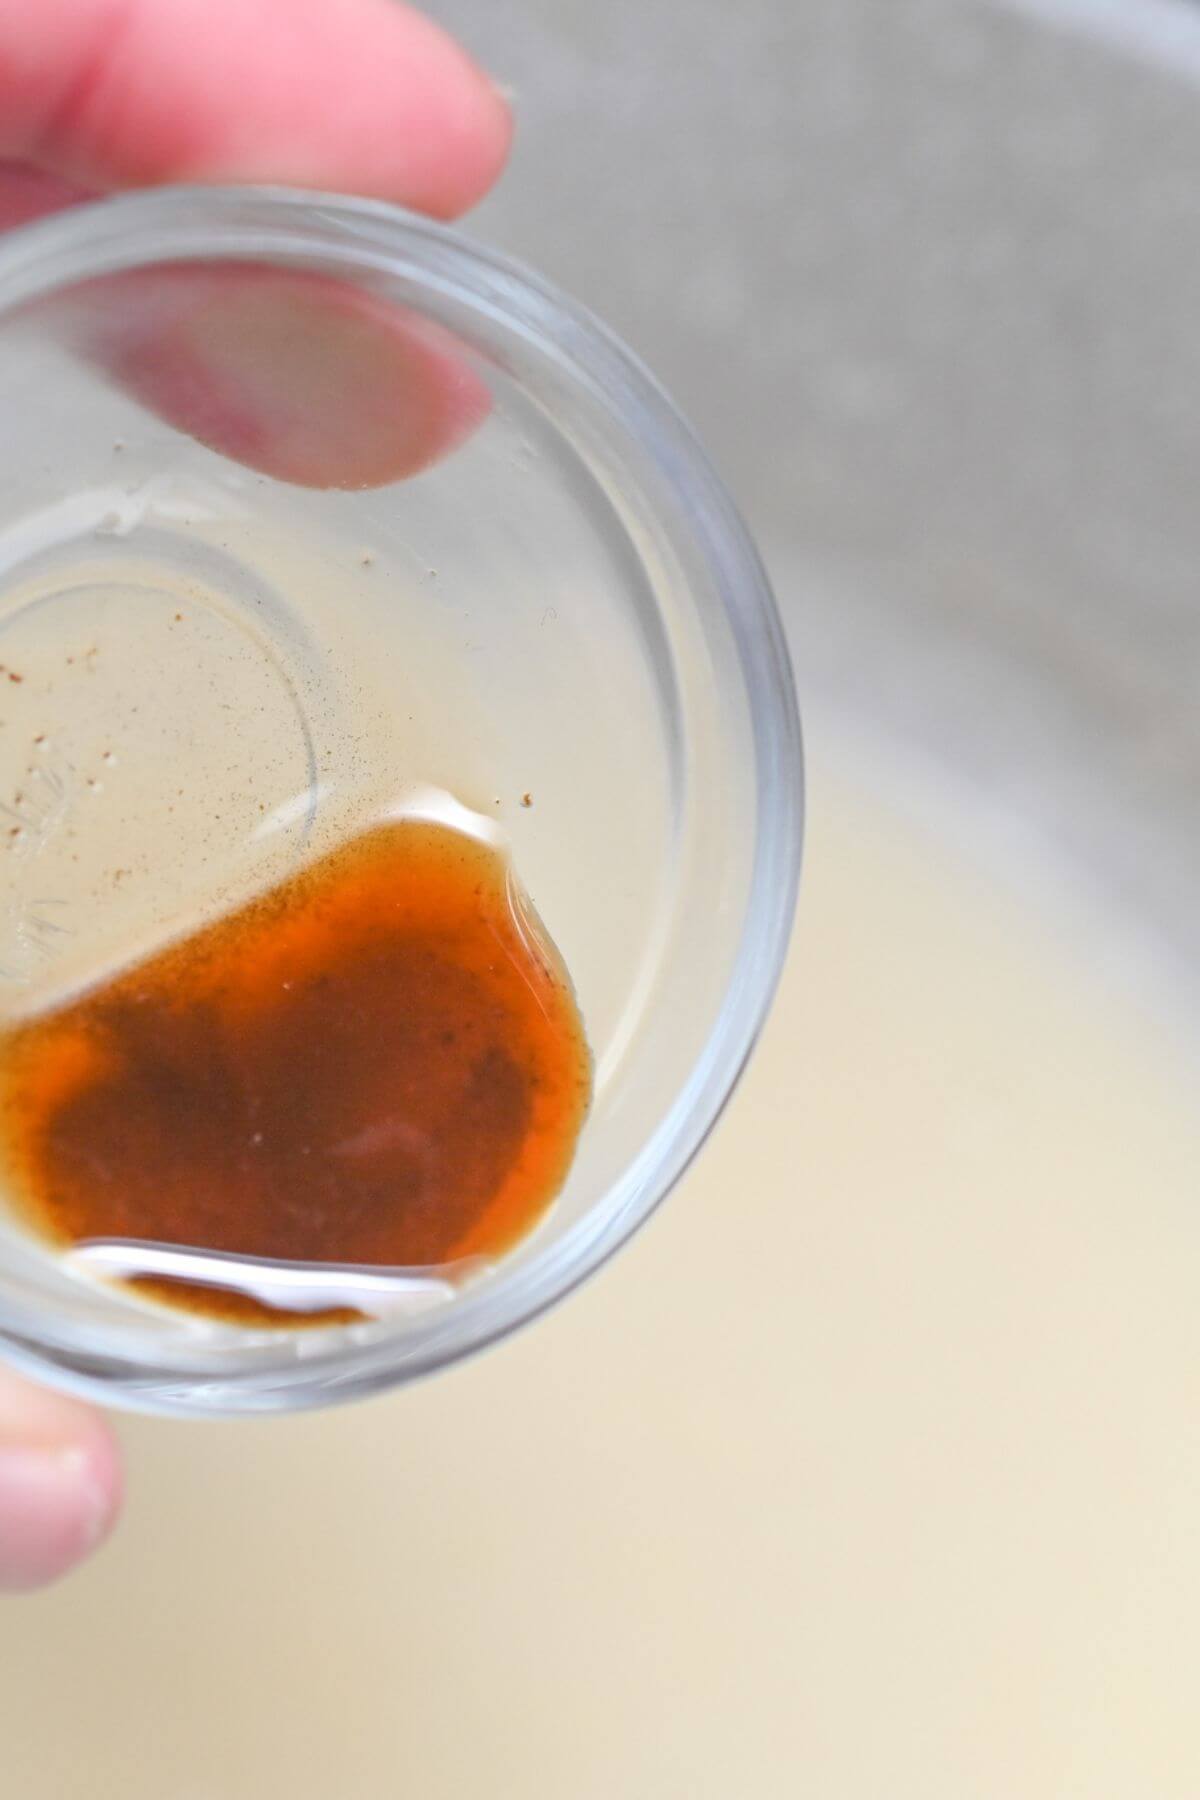 A person holding a glass bowl with Worcestershire sauce in it.